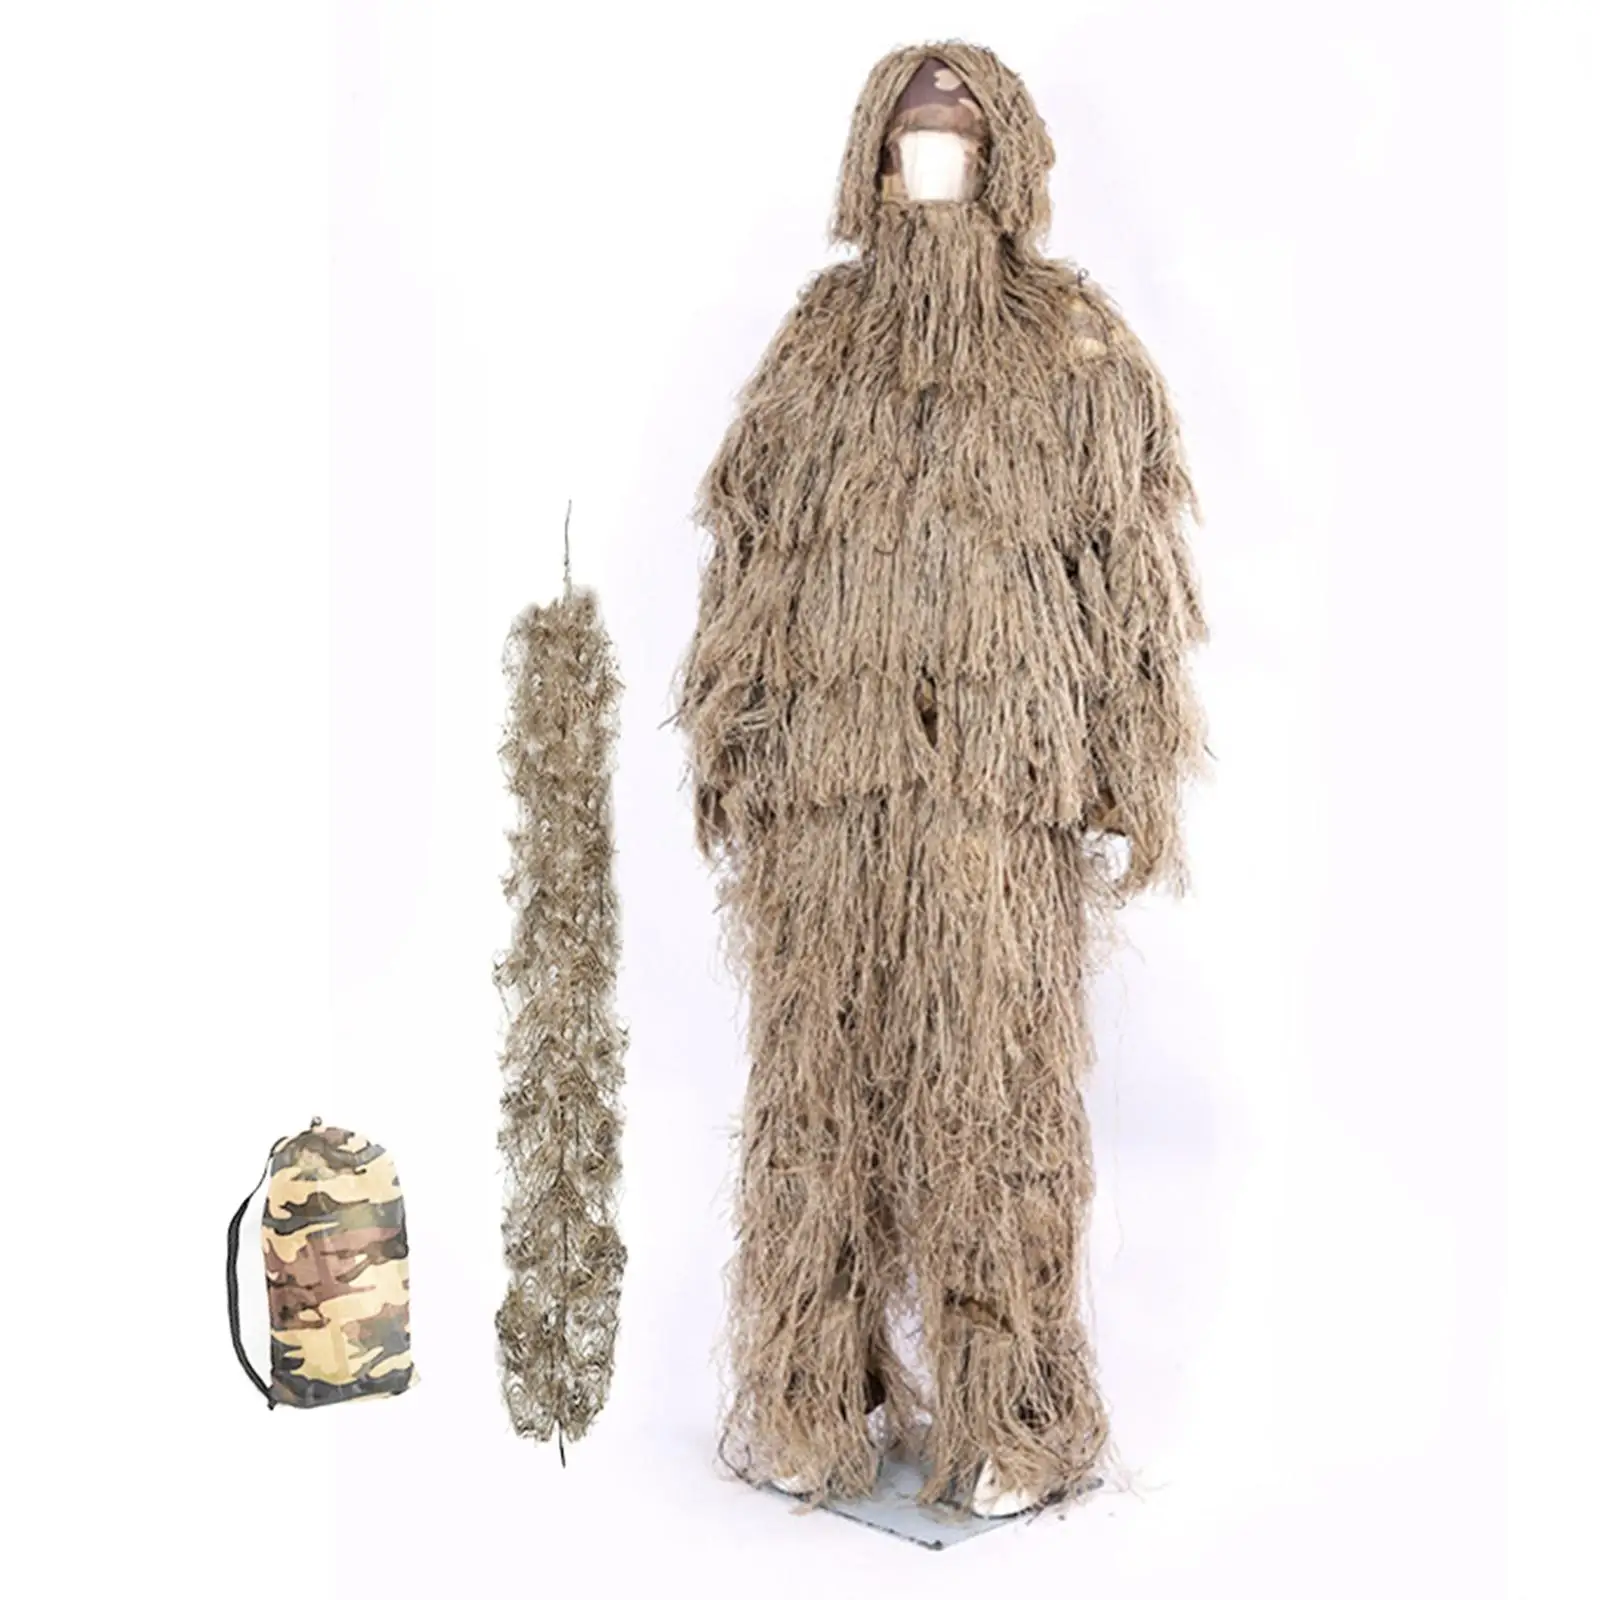 Adult Ghillie Suit Costume Clothing Lightweight Outfit Clothing Uniform Set for